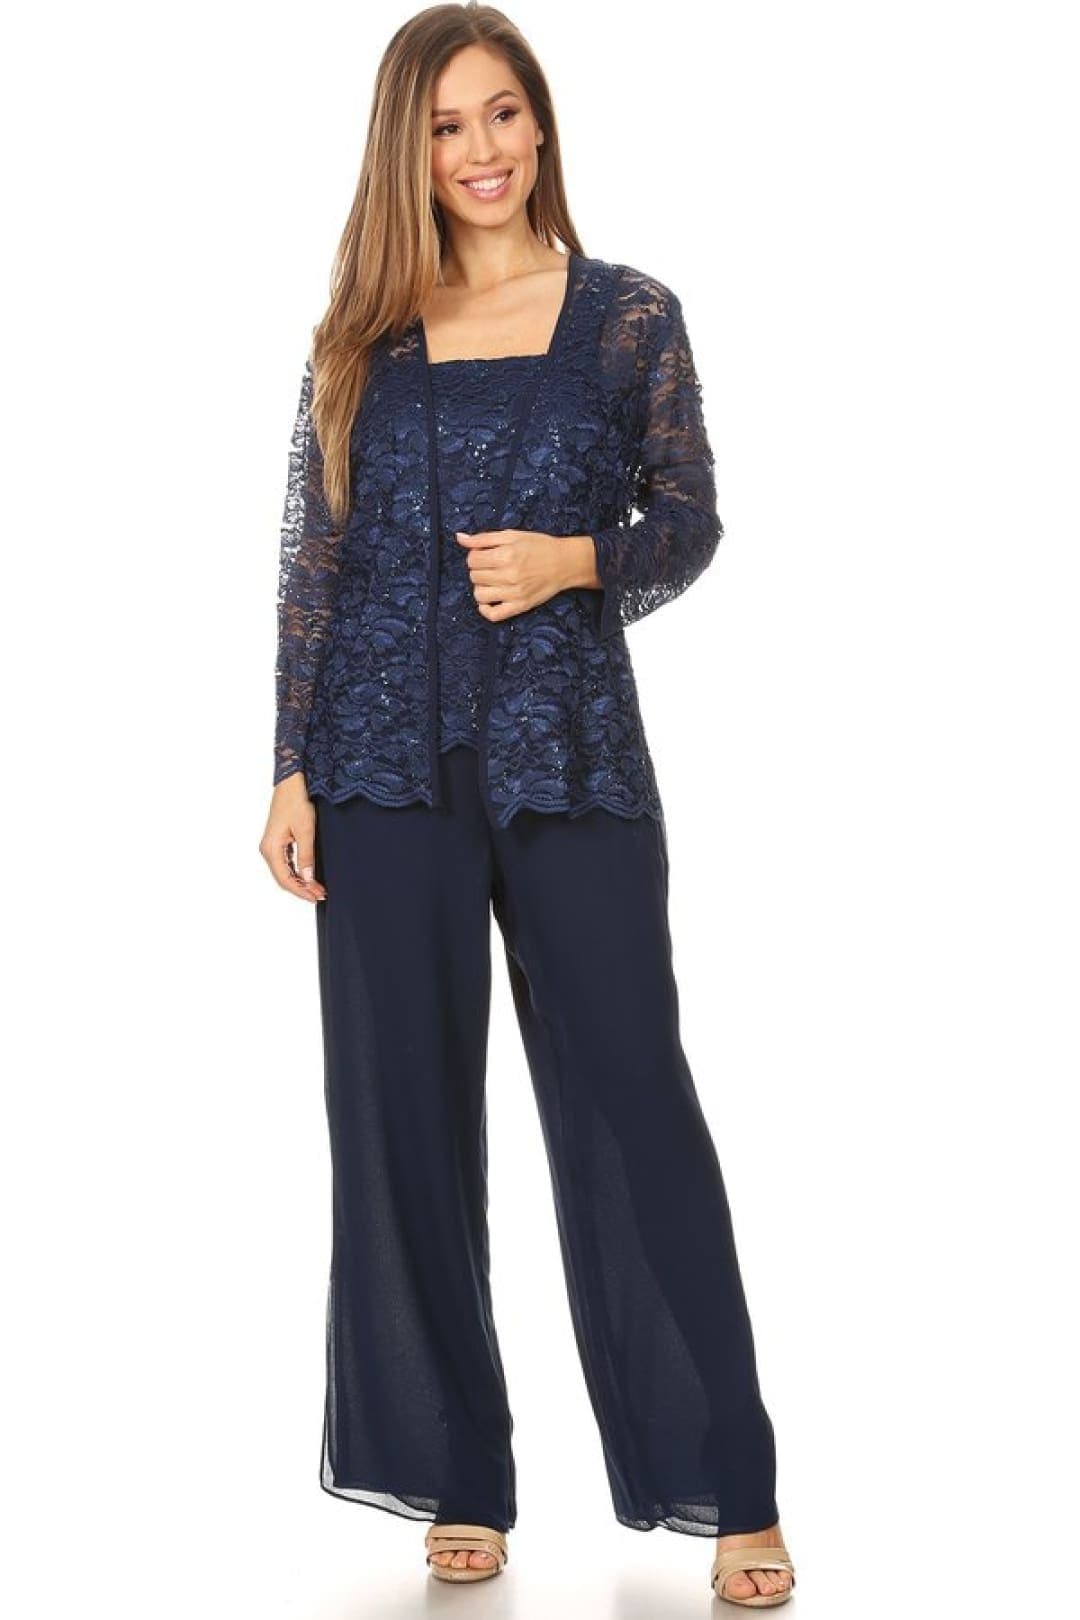 Buy online Blue Straight Pant Semi-stitched Suit from Suits & Dress  material for Women by Yoyo Fashion for ₹1229 at 67% off